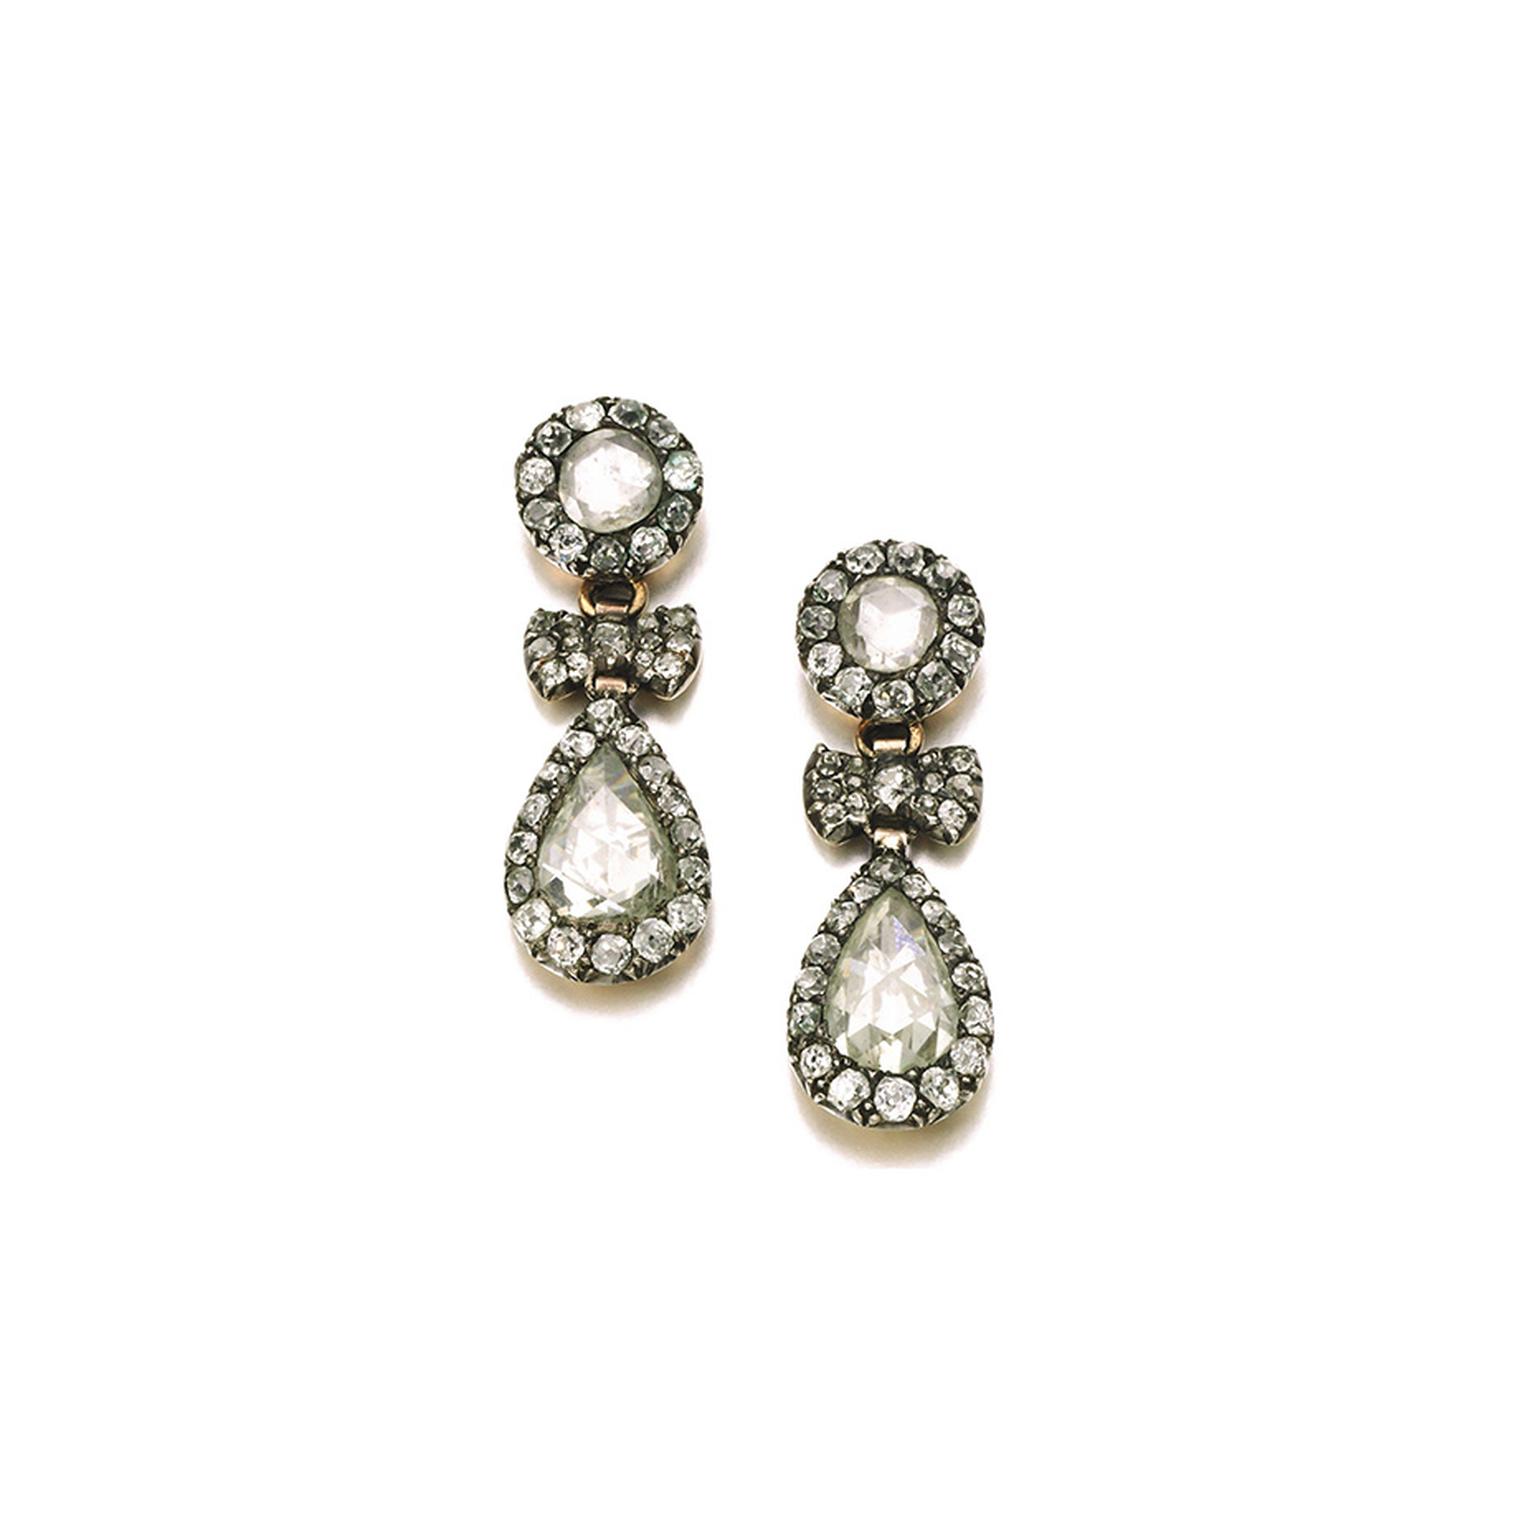 From Lot 292, late 18th century diamond pendent earrings up for auction at Sotheby's London (estimate: £ 15,000-25,000).